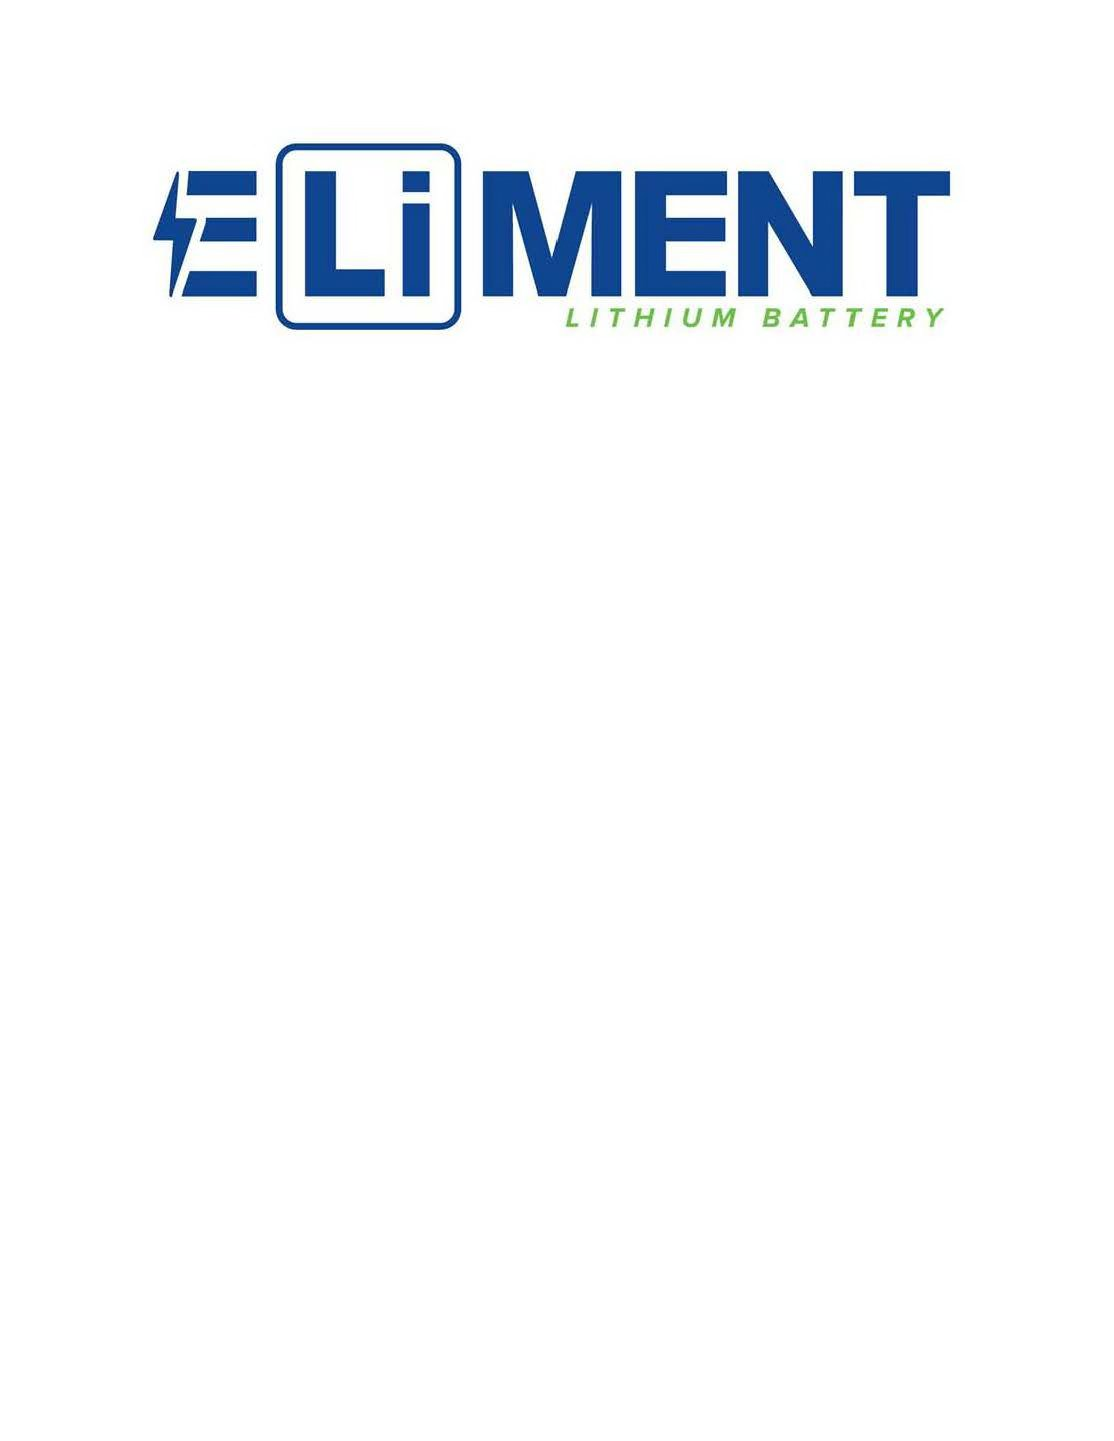  ELIMENT LITHIUM BATTERY